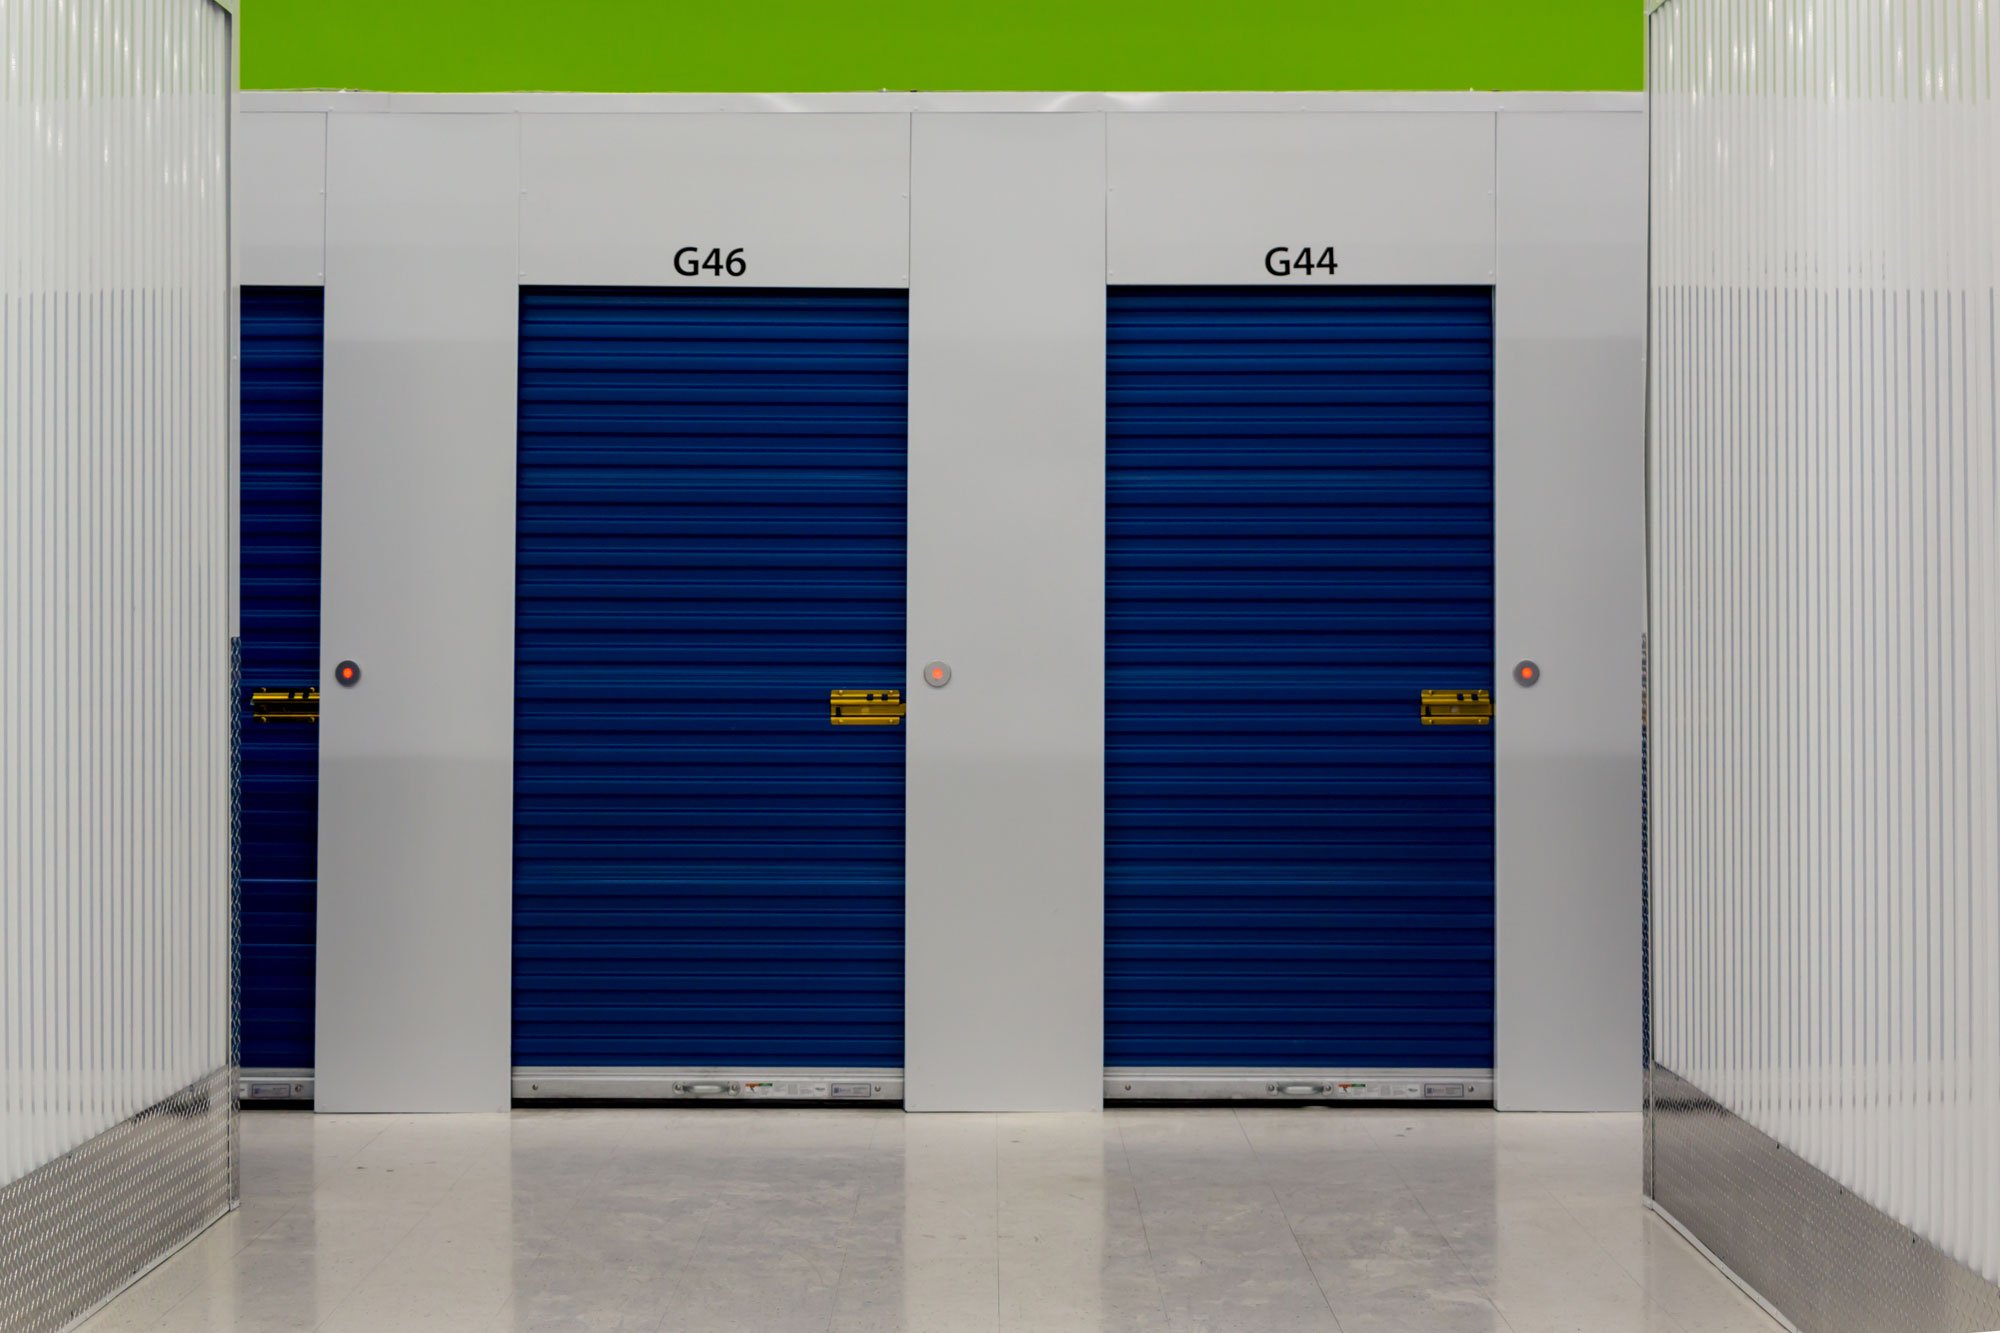 Hallway with swinging self-storage doors equipped with Noke Smart Entry locks 